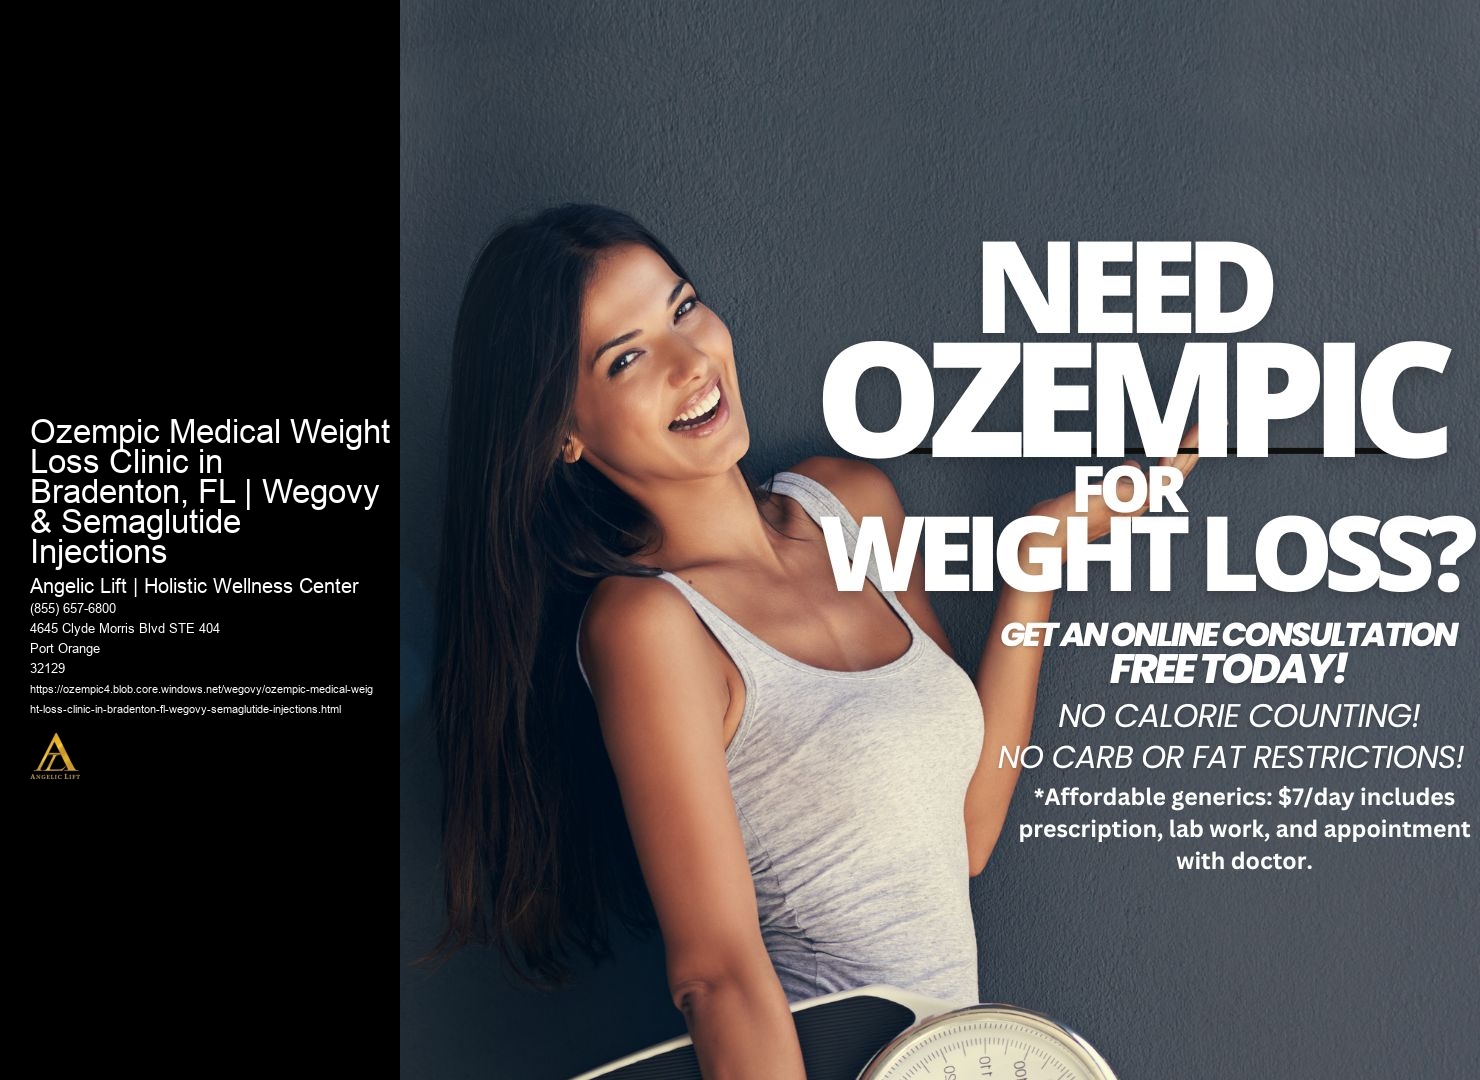 Ozempic Medical Weight Loss Clinic in Bradenton, FL | Wegovy & Semaglutide Injections